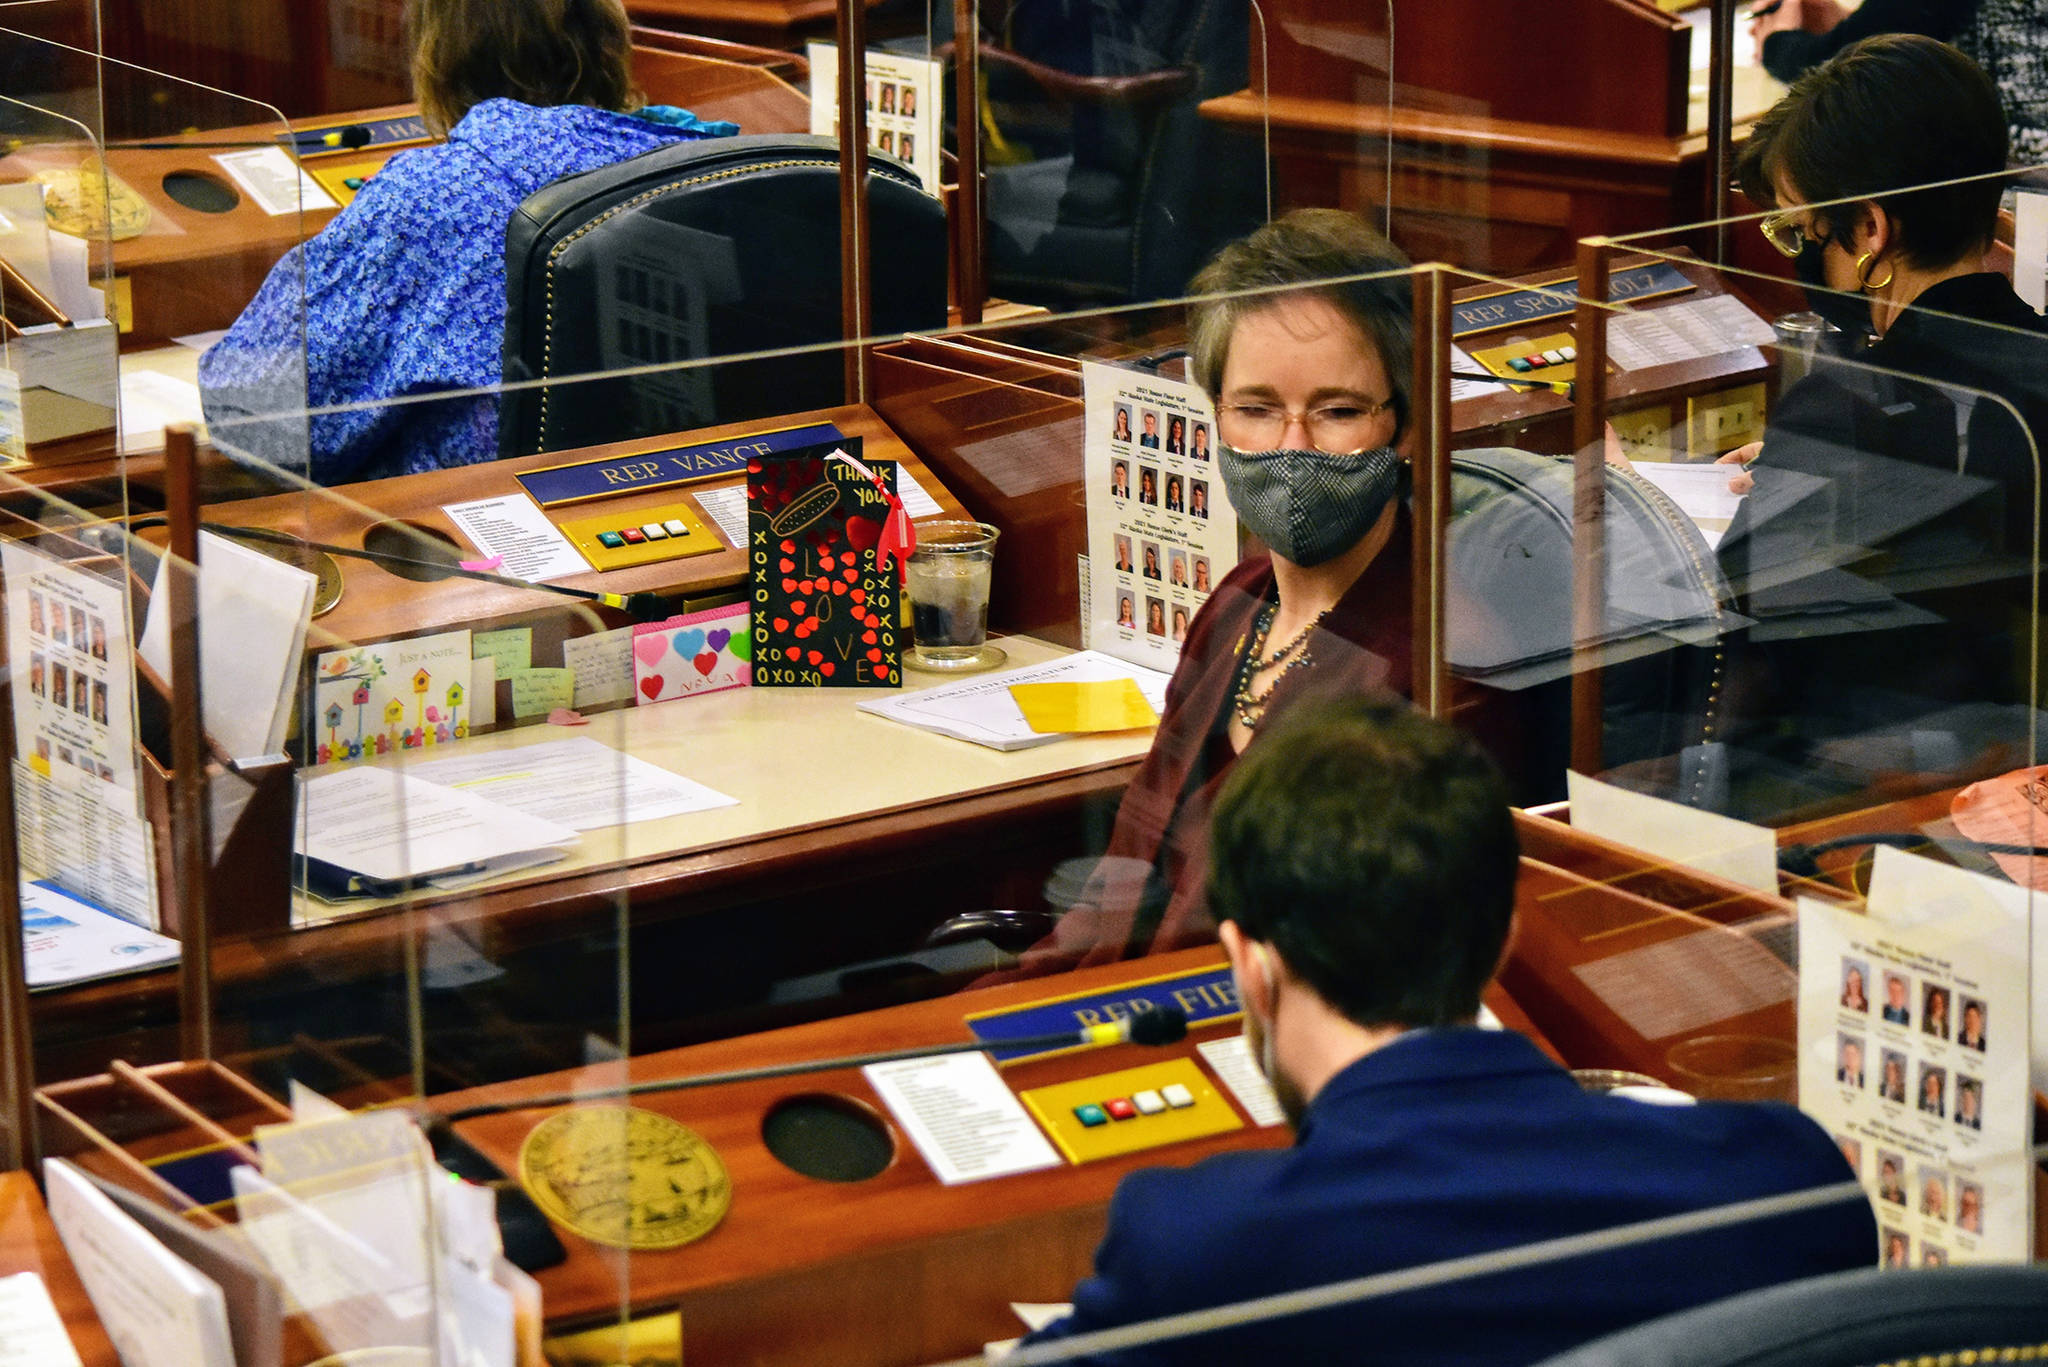 Rep. Sarah Vance, R-Homer, listens as Rep. Zack Fields, D-Anchorage, delivers an apology on Friday, March 5, 2021, for earlier remarks. Vance called for a Sense of the House vote to rebuke Fields for his comments. (Peter Segall/The Juneau Empire via AP, Pool)